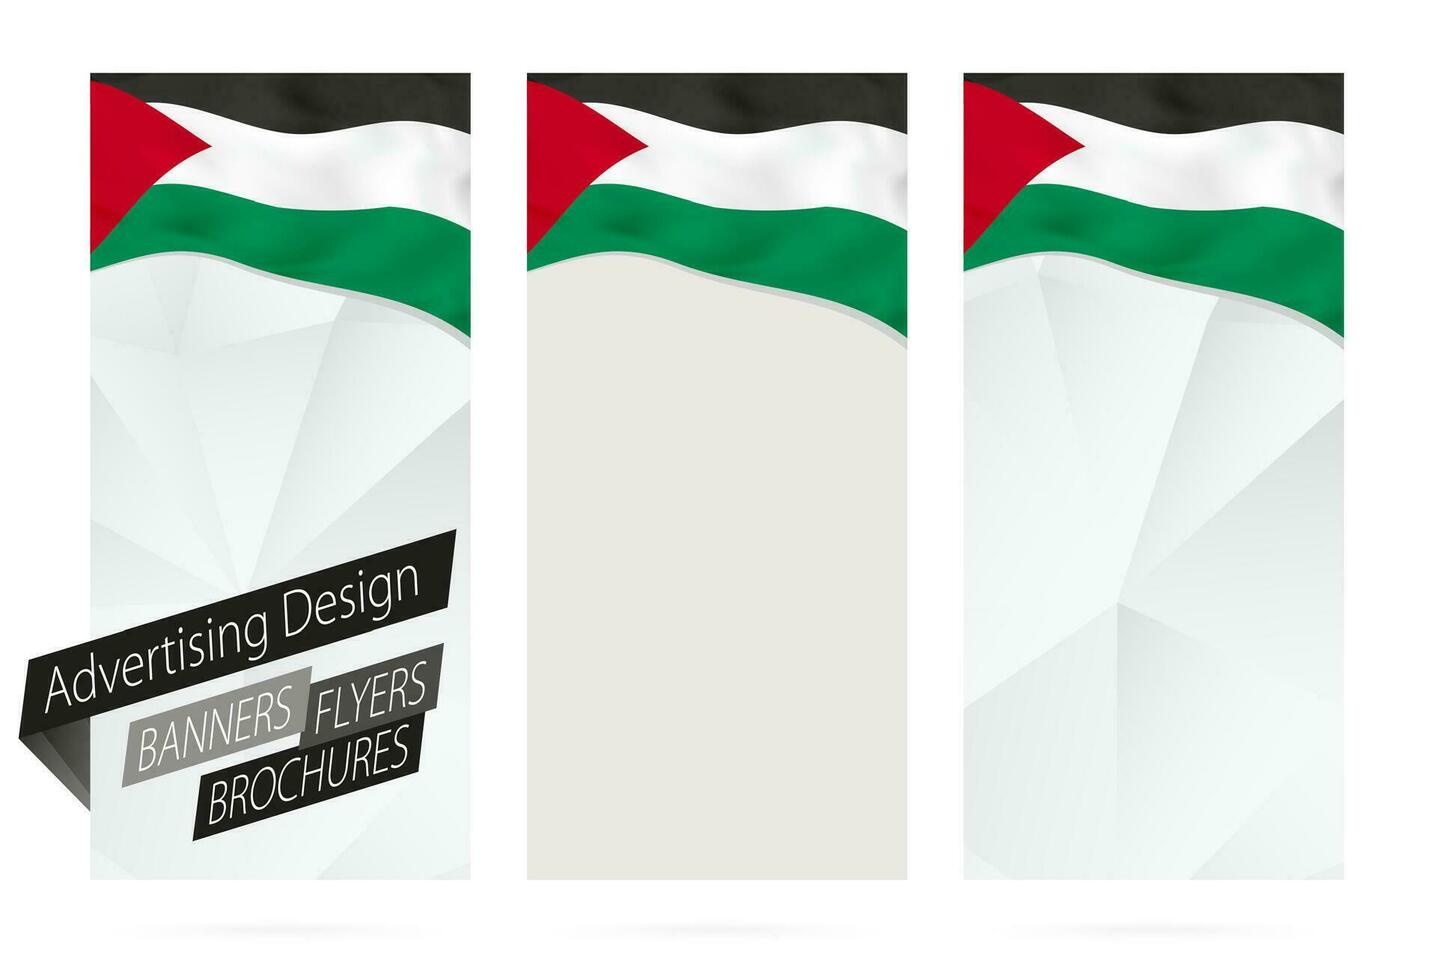 Design of banners, flyers, brochures with flag of Palestine. vector